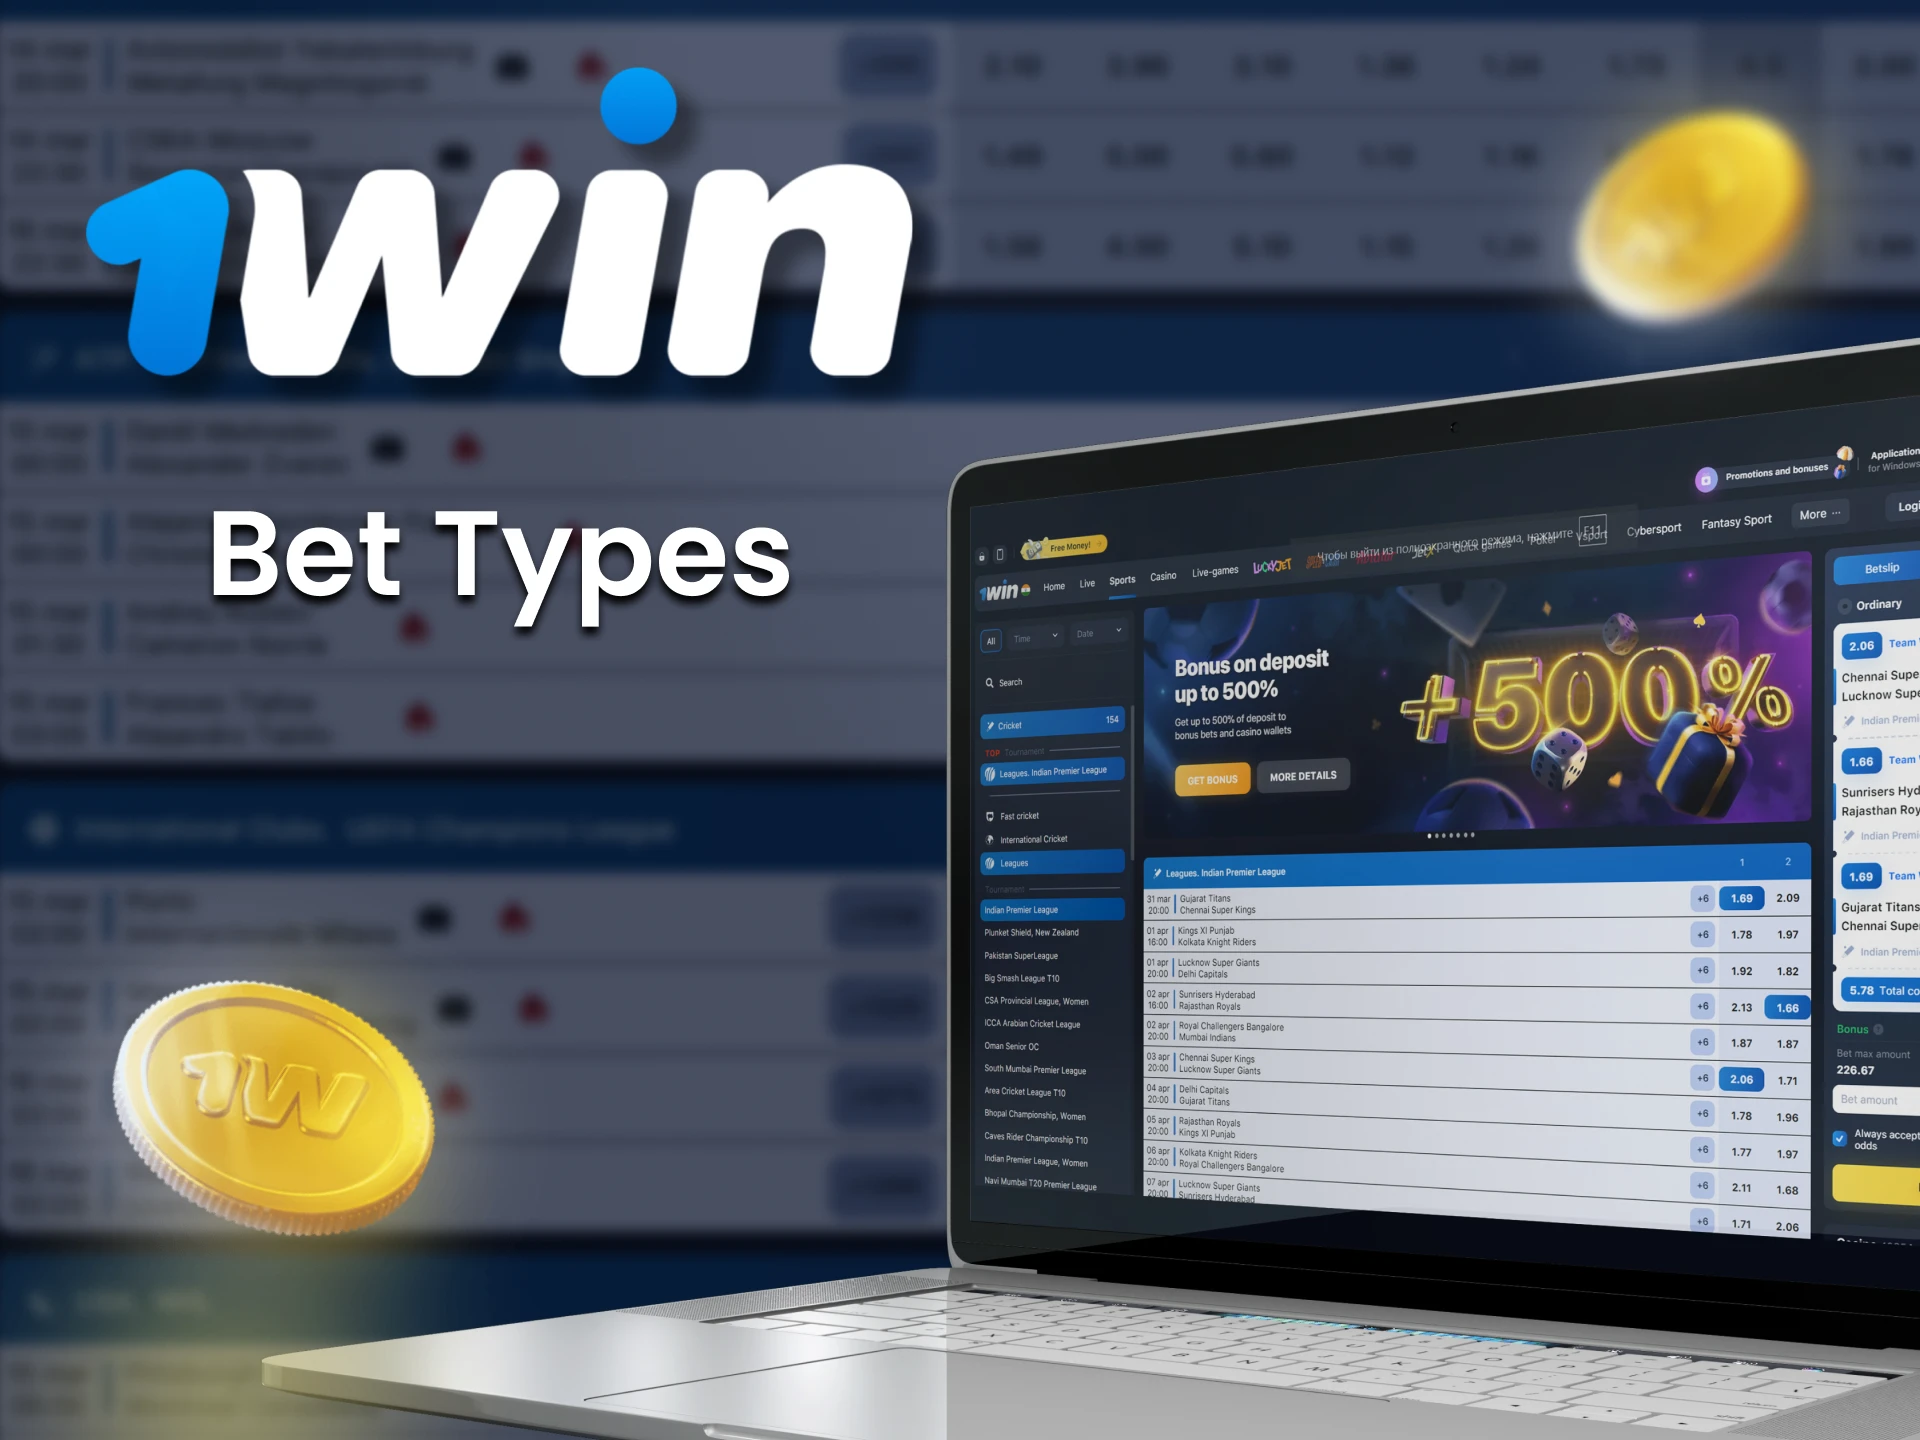 Choose what type of bets to place in 1win.